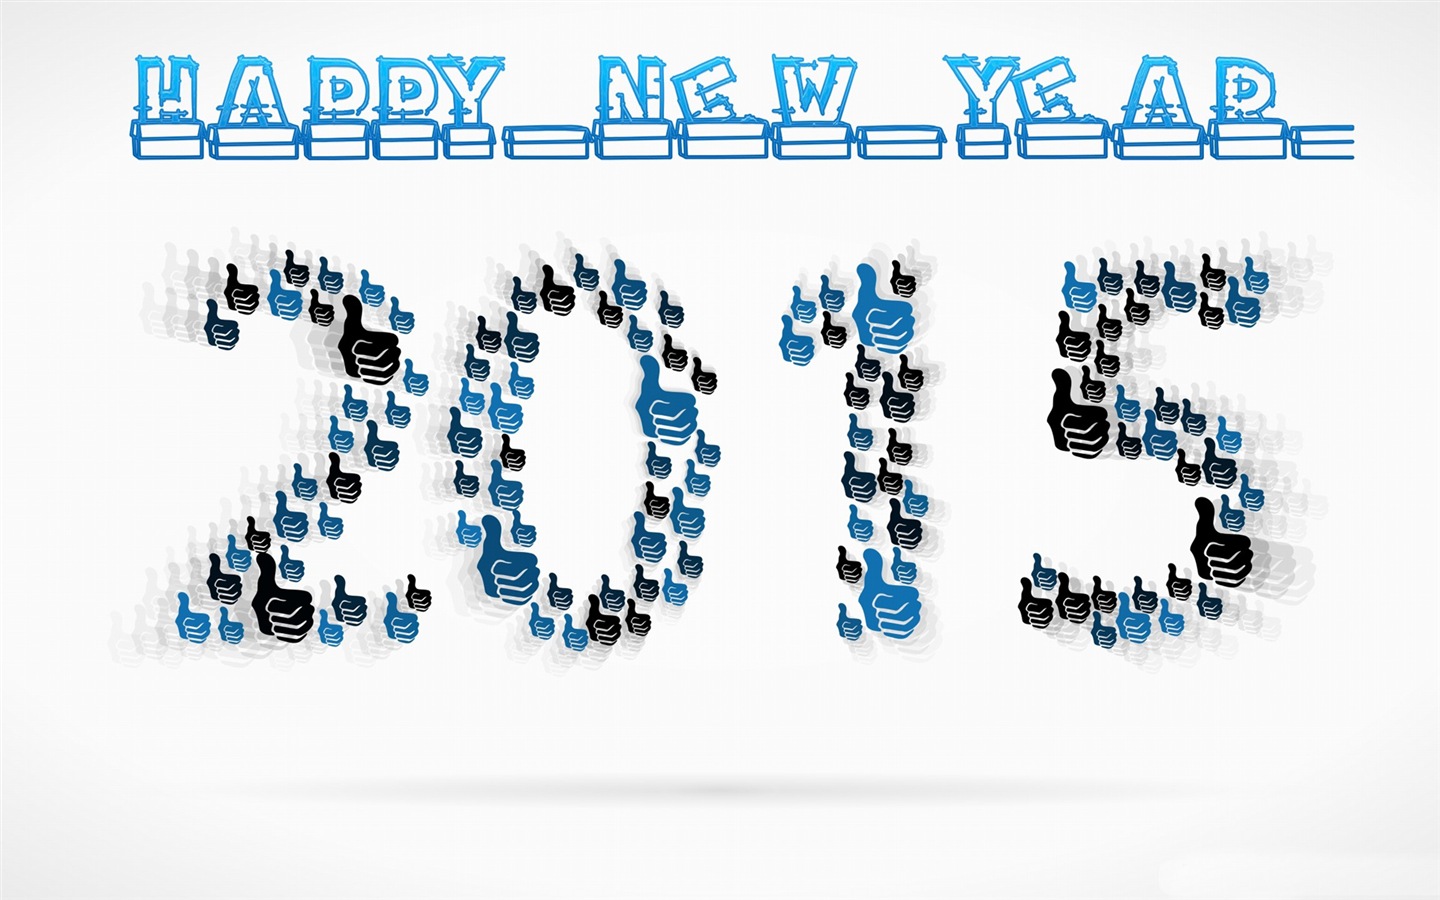 2015 New Year theme HD wallpapers (2) #10 - 1440x900